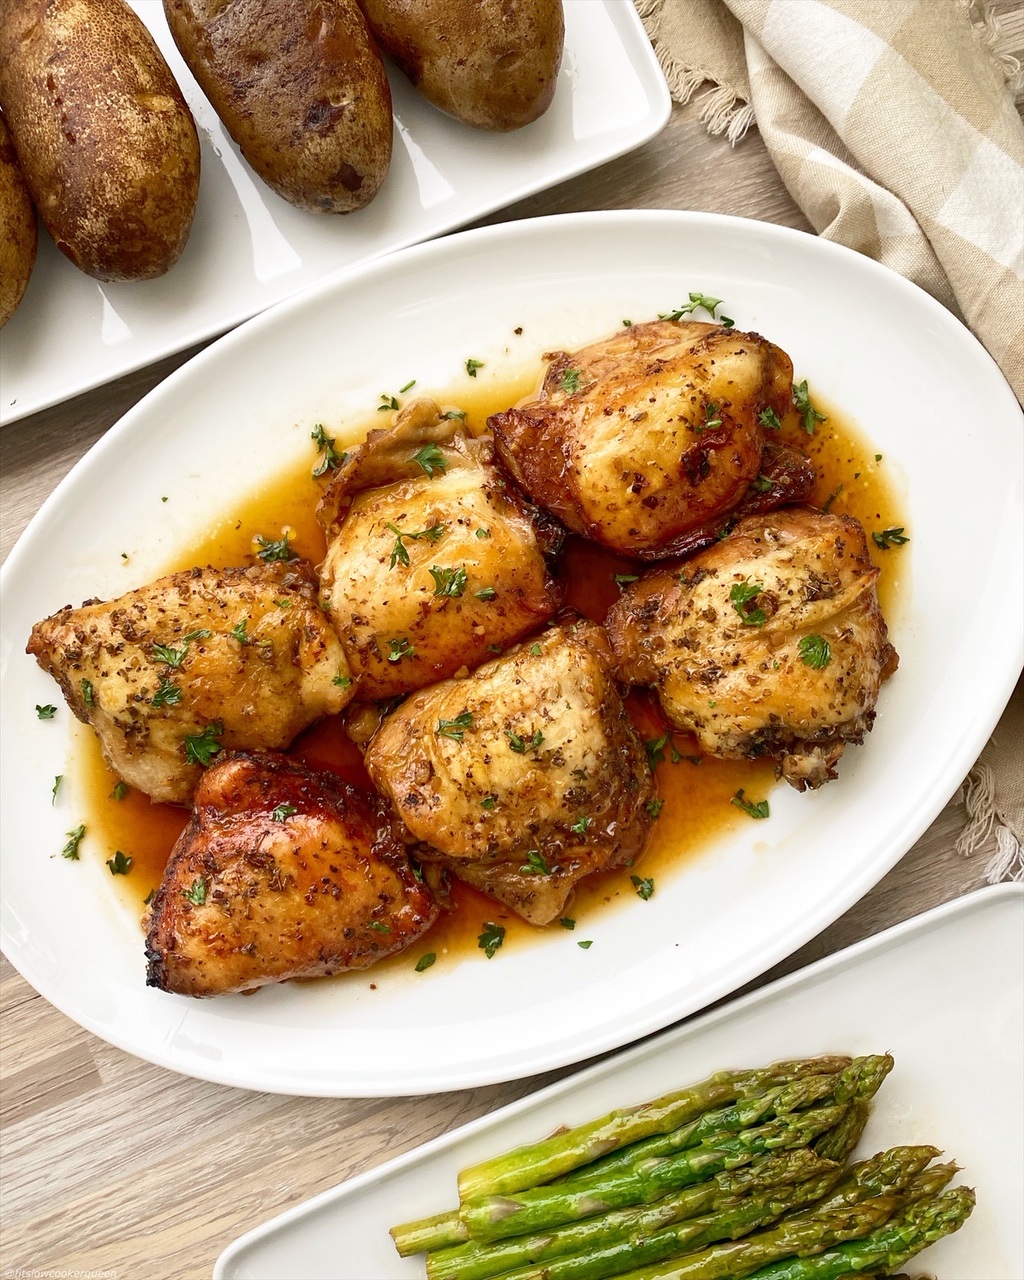 baked potatoes, asparagus, and chicken on white plate